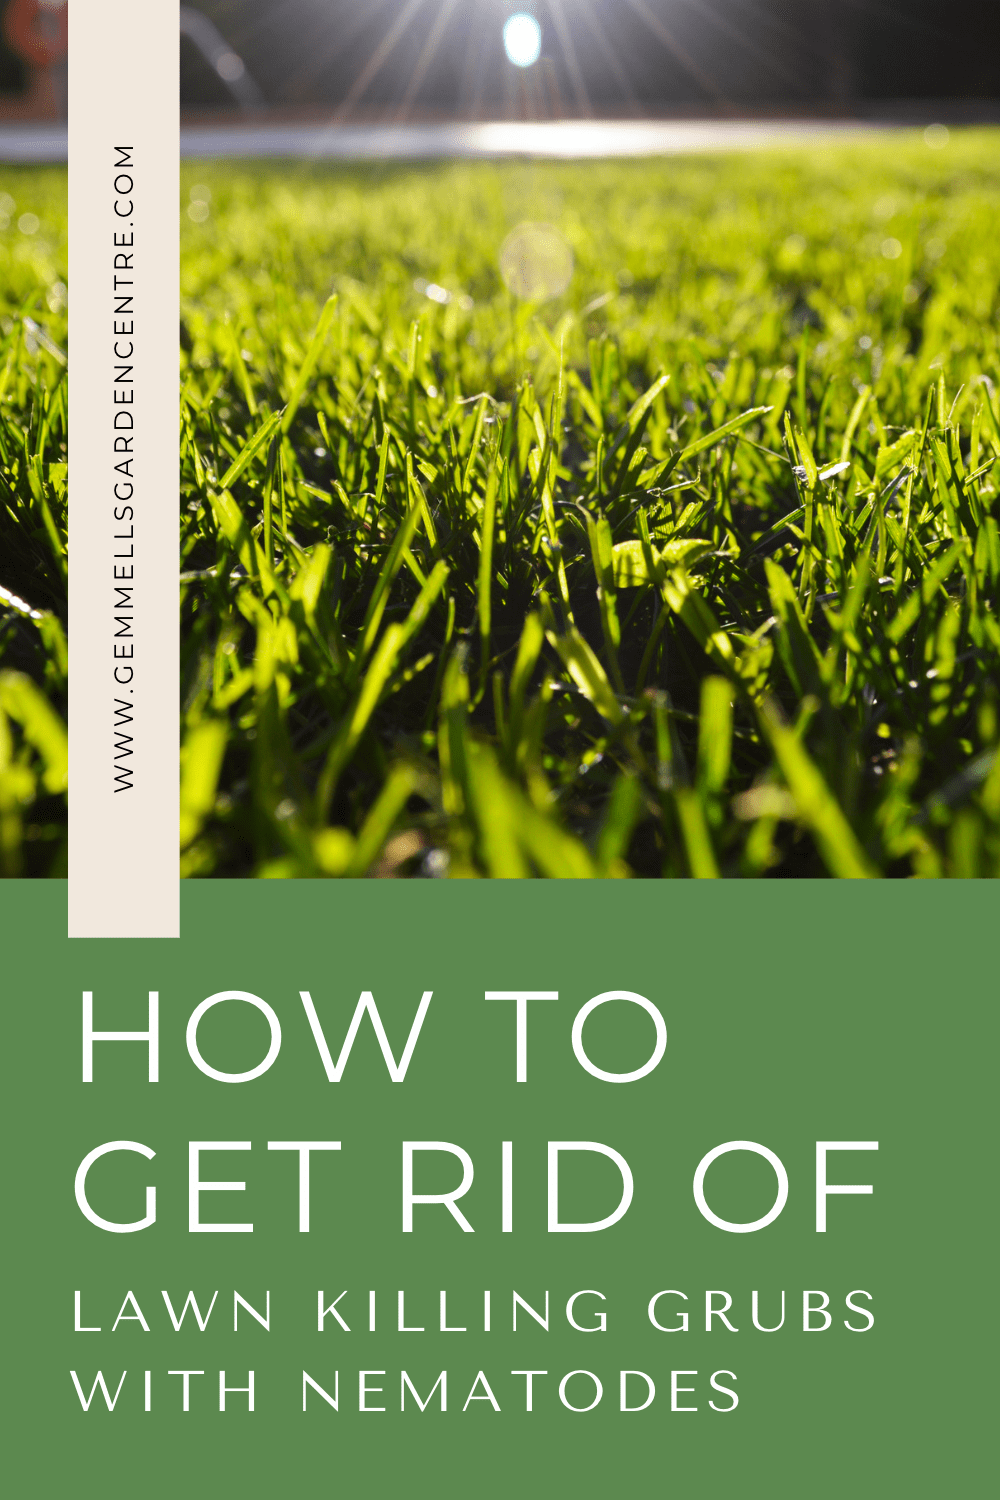 How to Get Rid of Lawn Killing Grubs | Nematodes